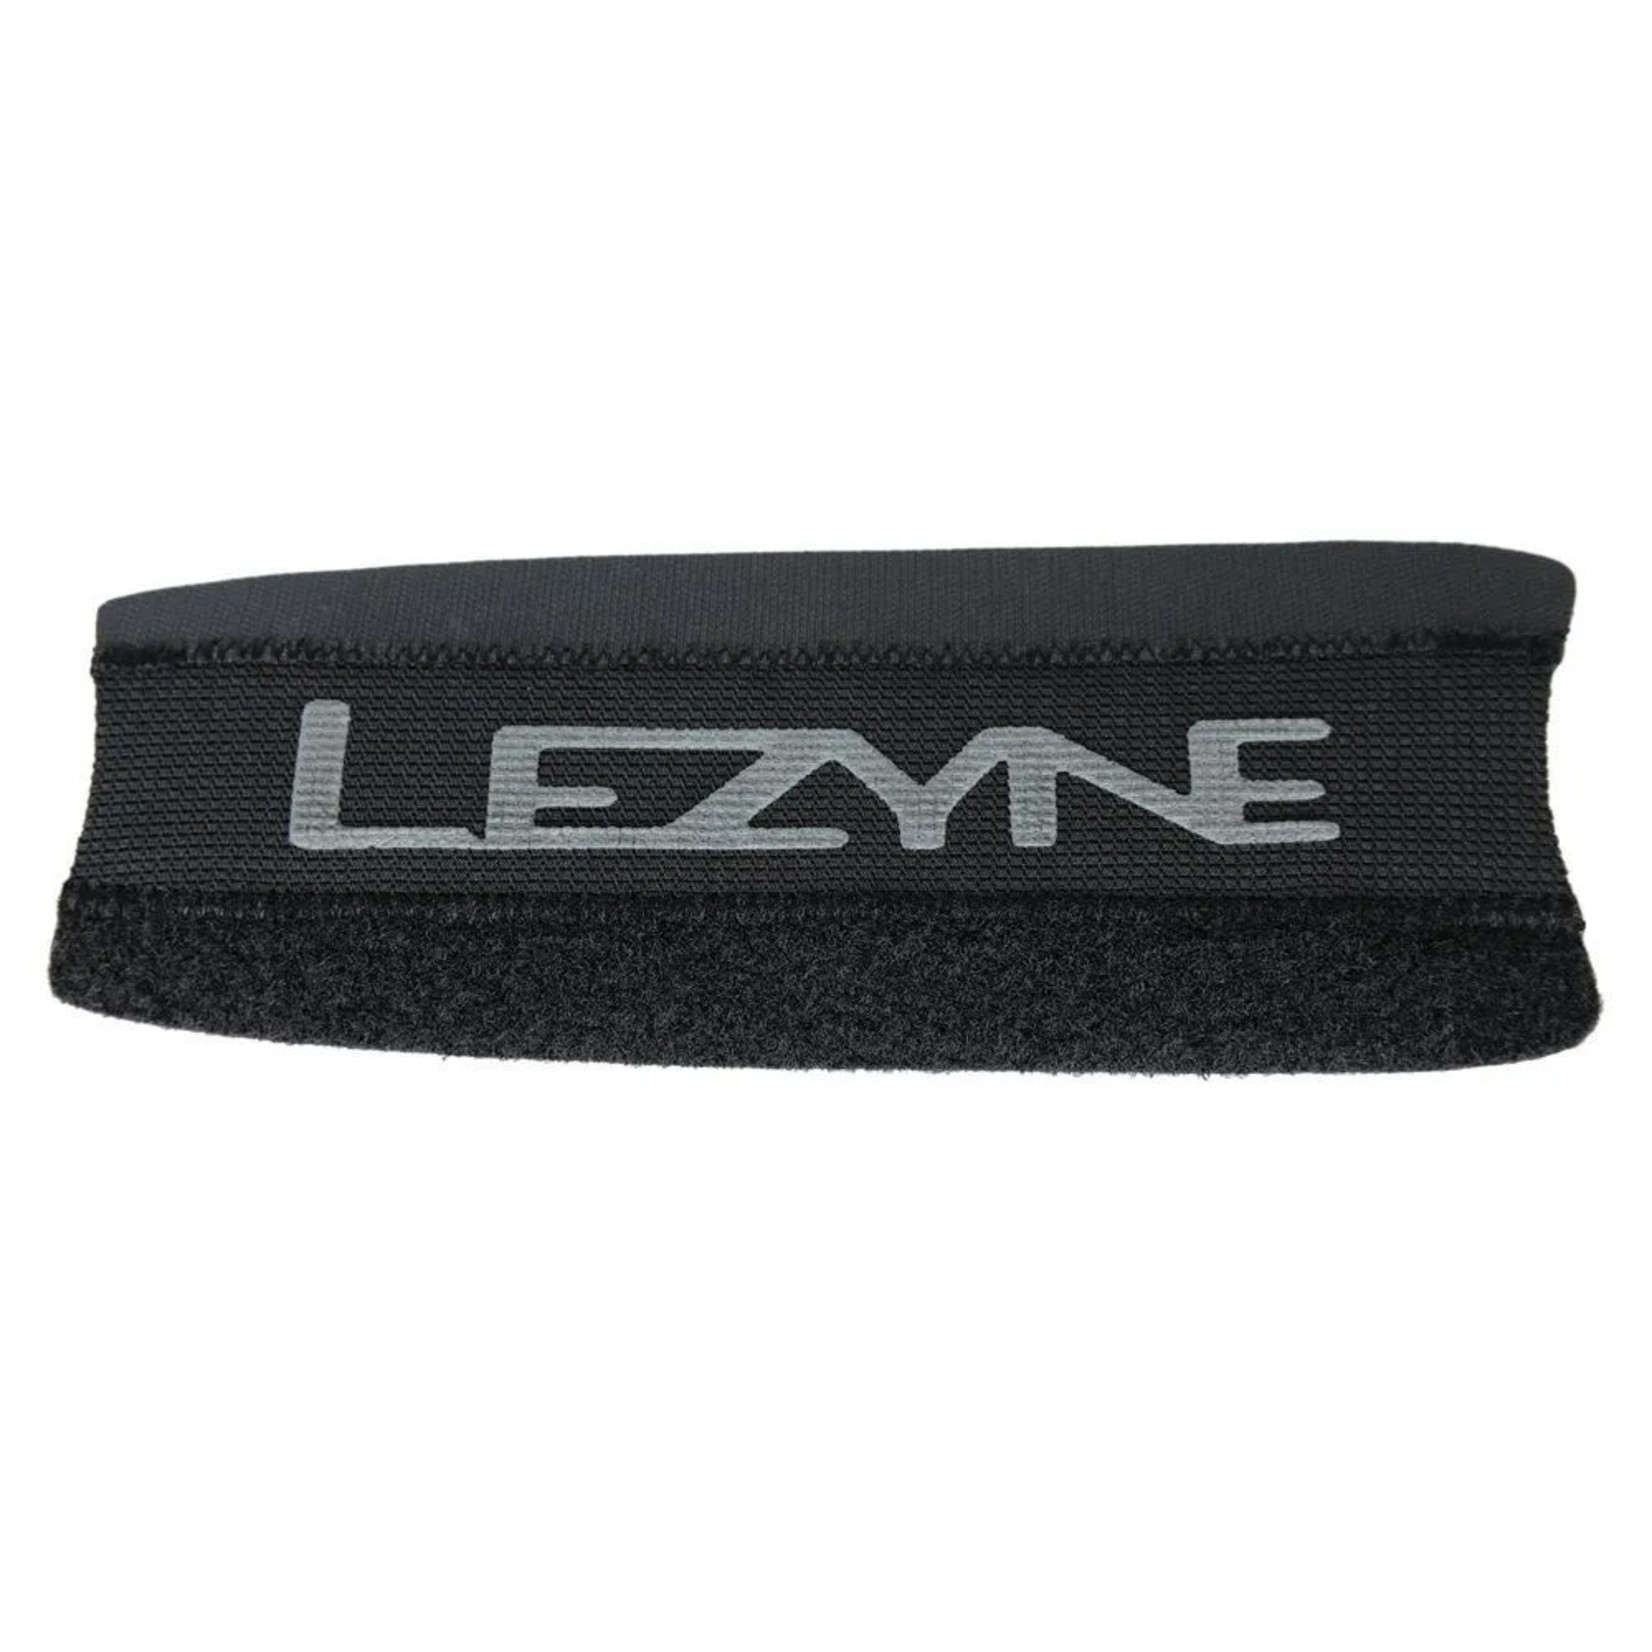 Lezyne Smart Chainstay Protector S